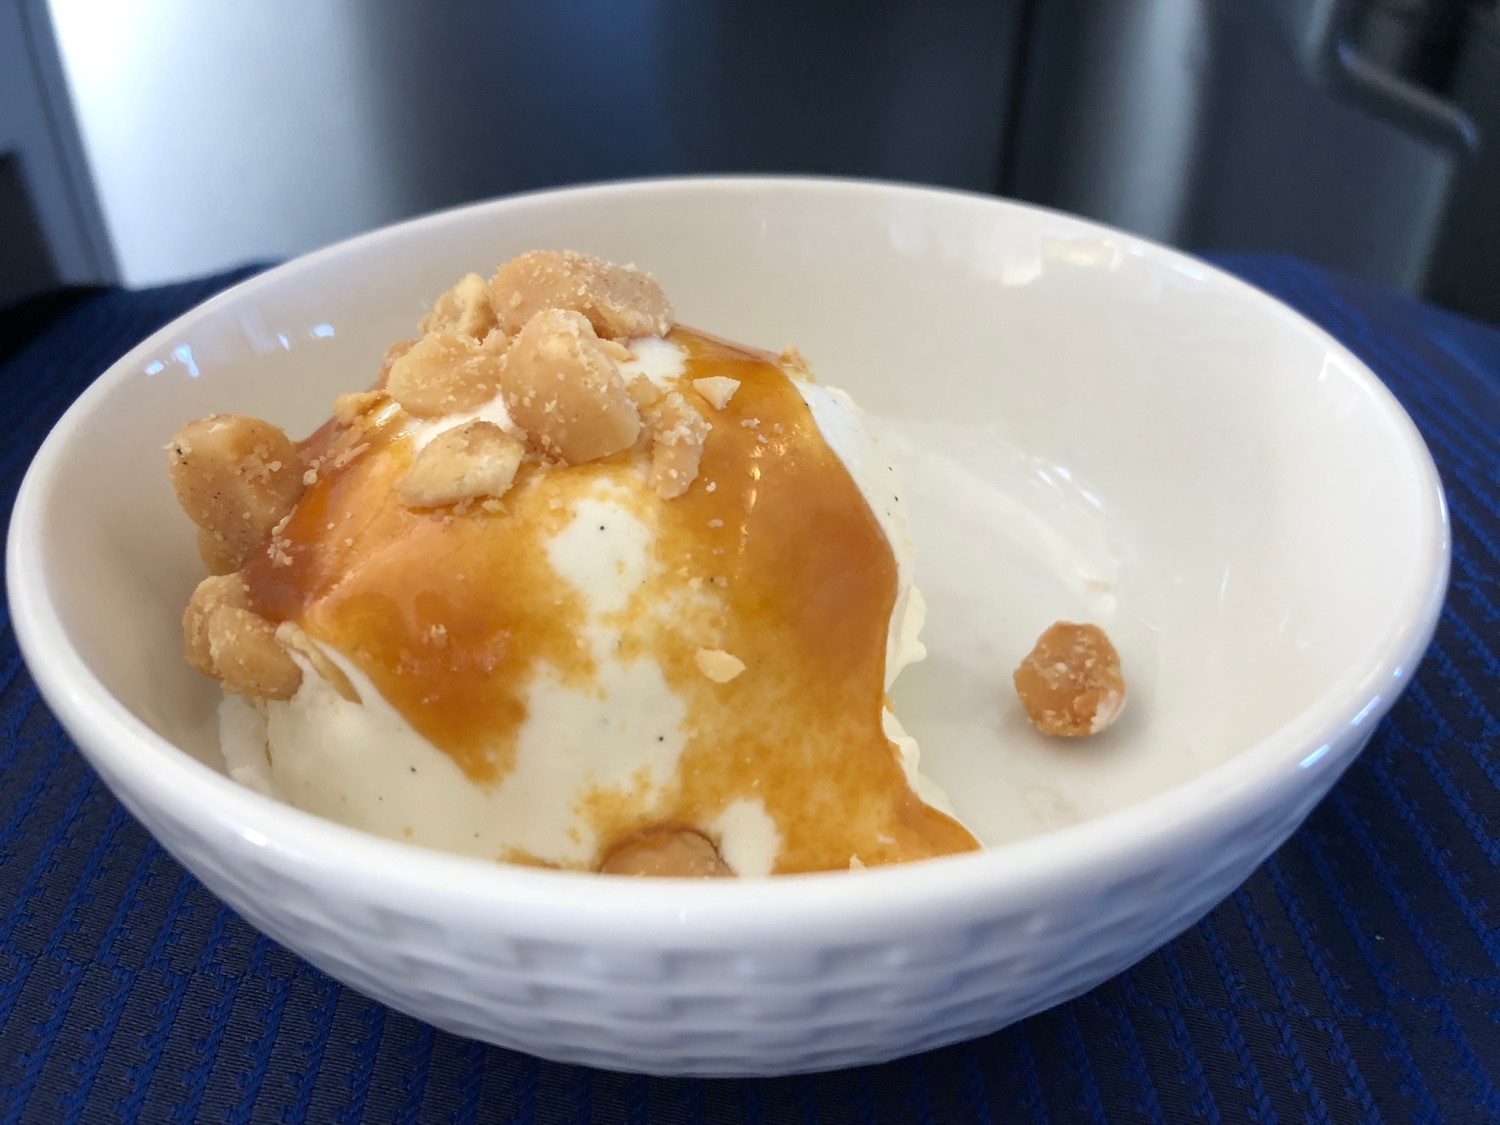 a bowl of ice cream with caramel sauce and nuts